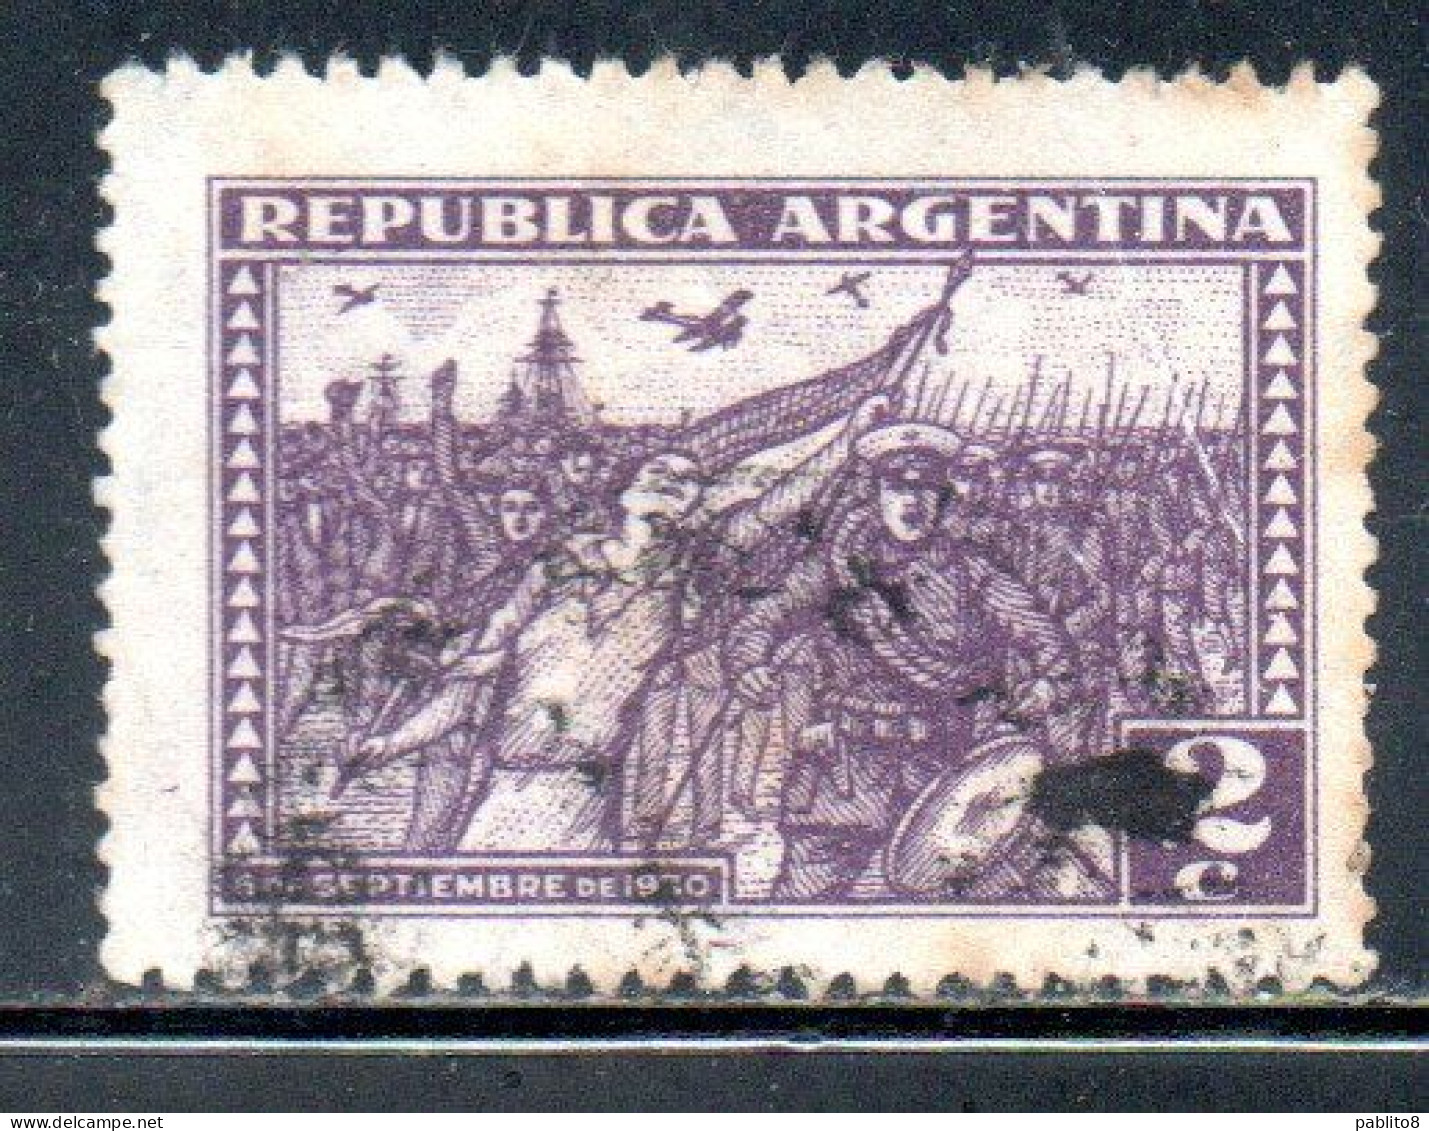 ARGENTINA 1930 REVOLUTION OF SEPTIEMBRE CENT. 2c USATO USED OBLITERE' - Used Stamps